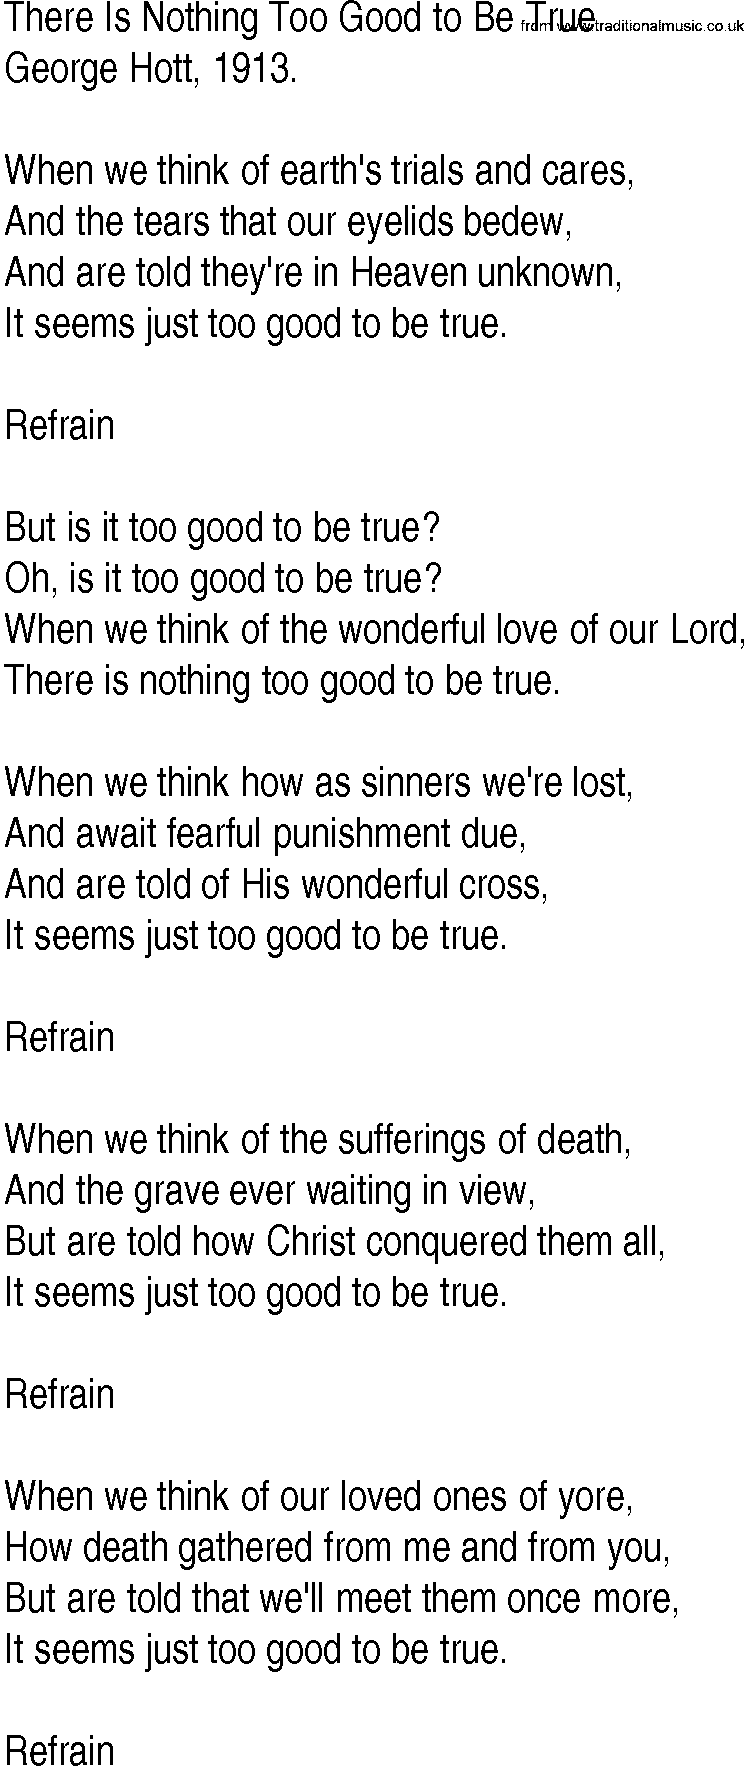 Hymn and Gospel Song: There Is Nothing Too Good to Be True by George Hott lyrics